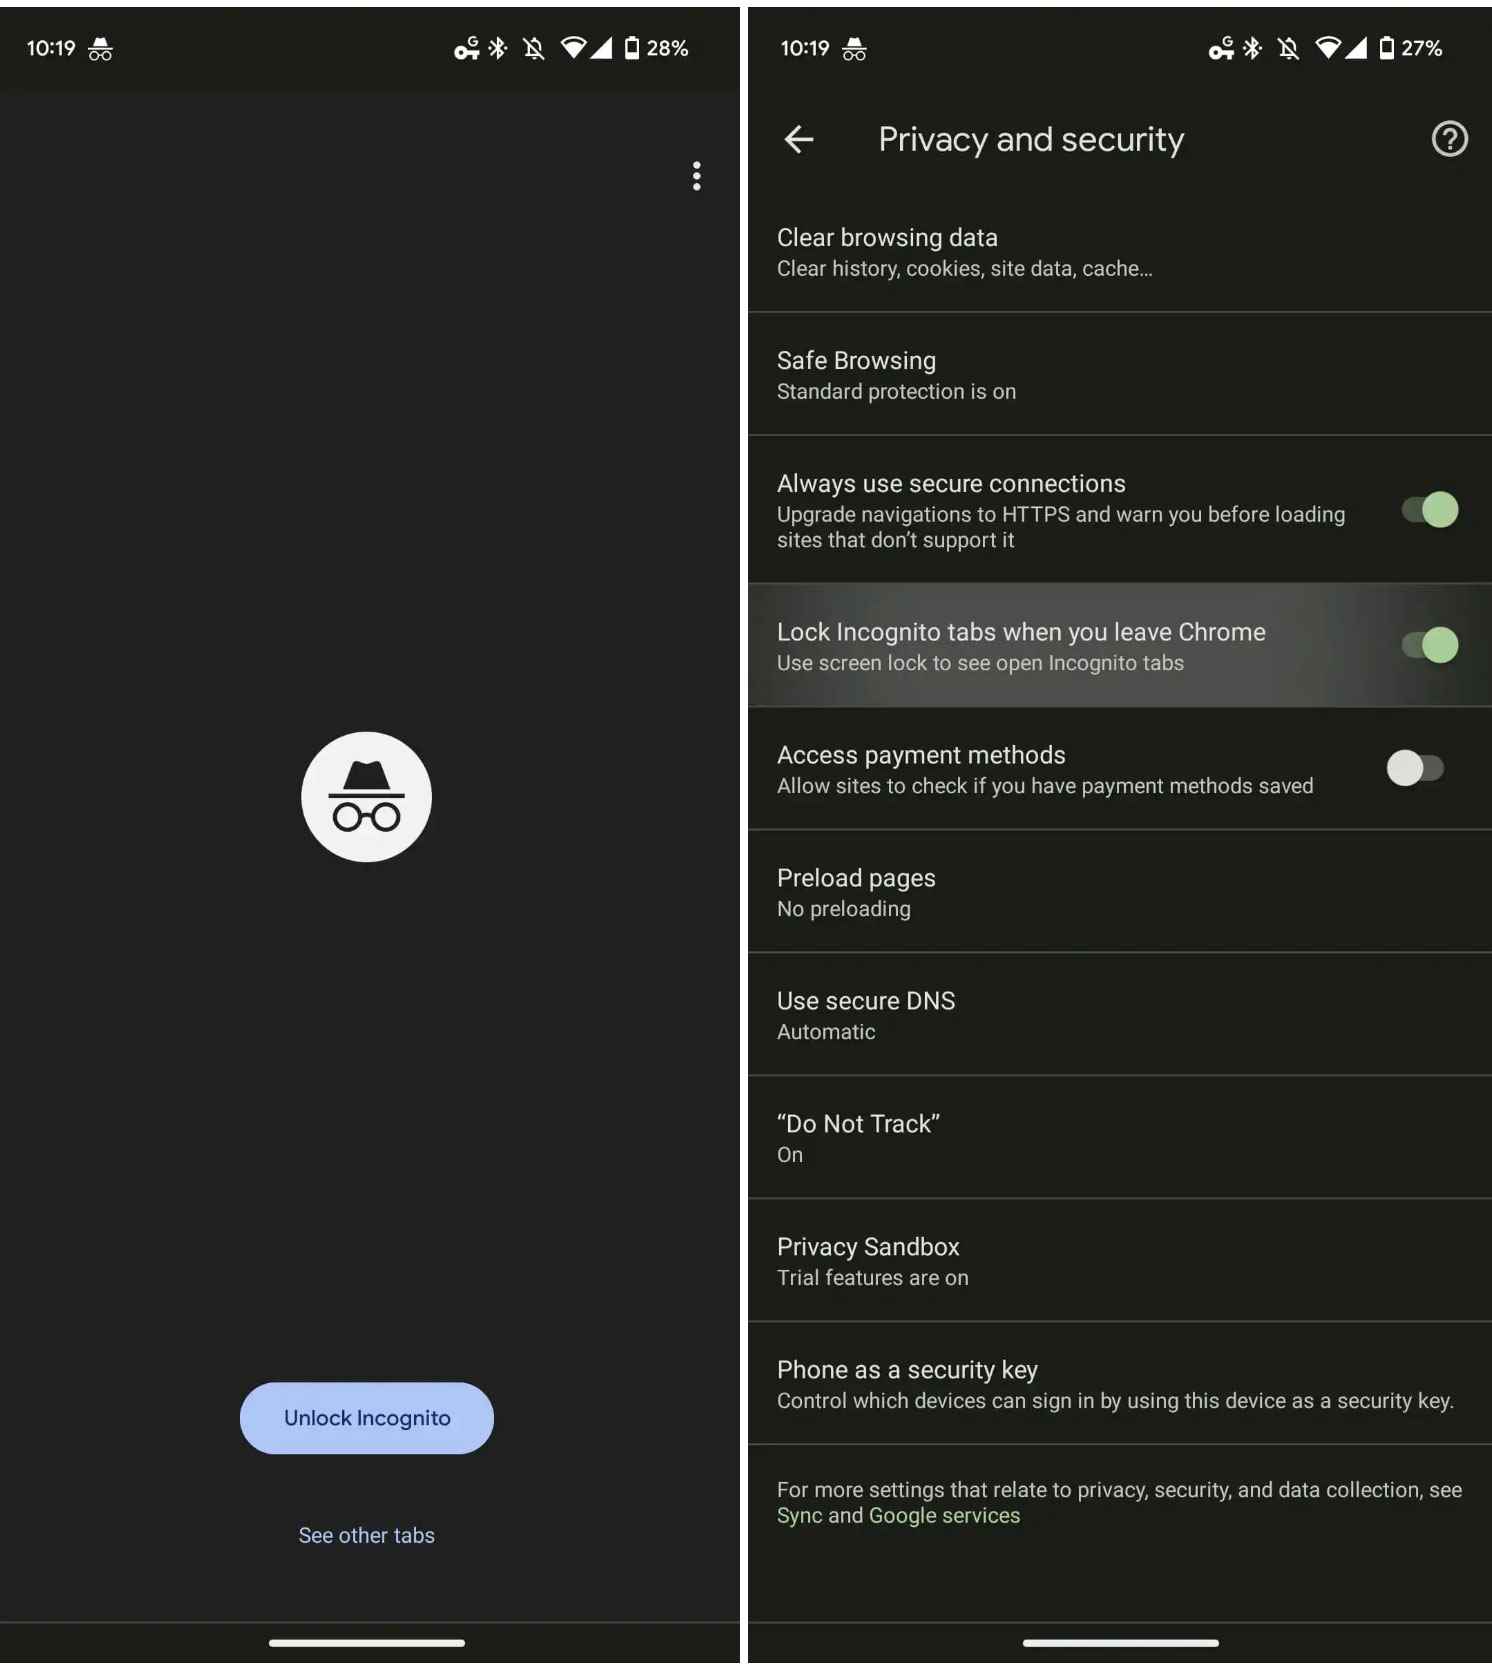 1663363130 469 Chrome for Android brings fingerprint protection for incognito tabs